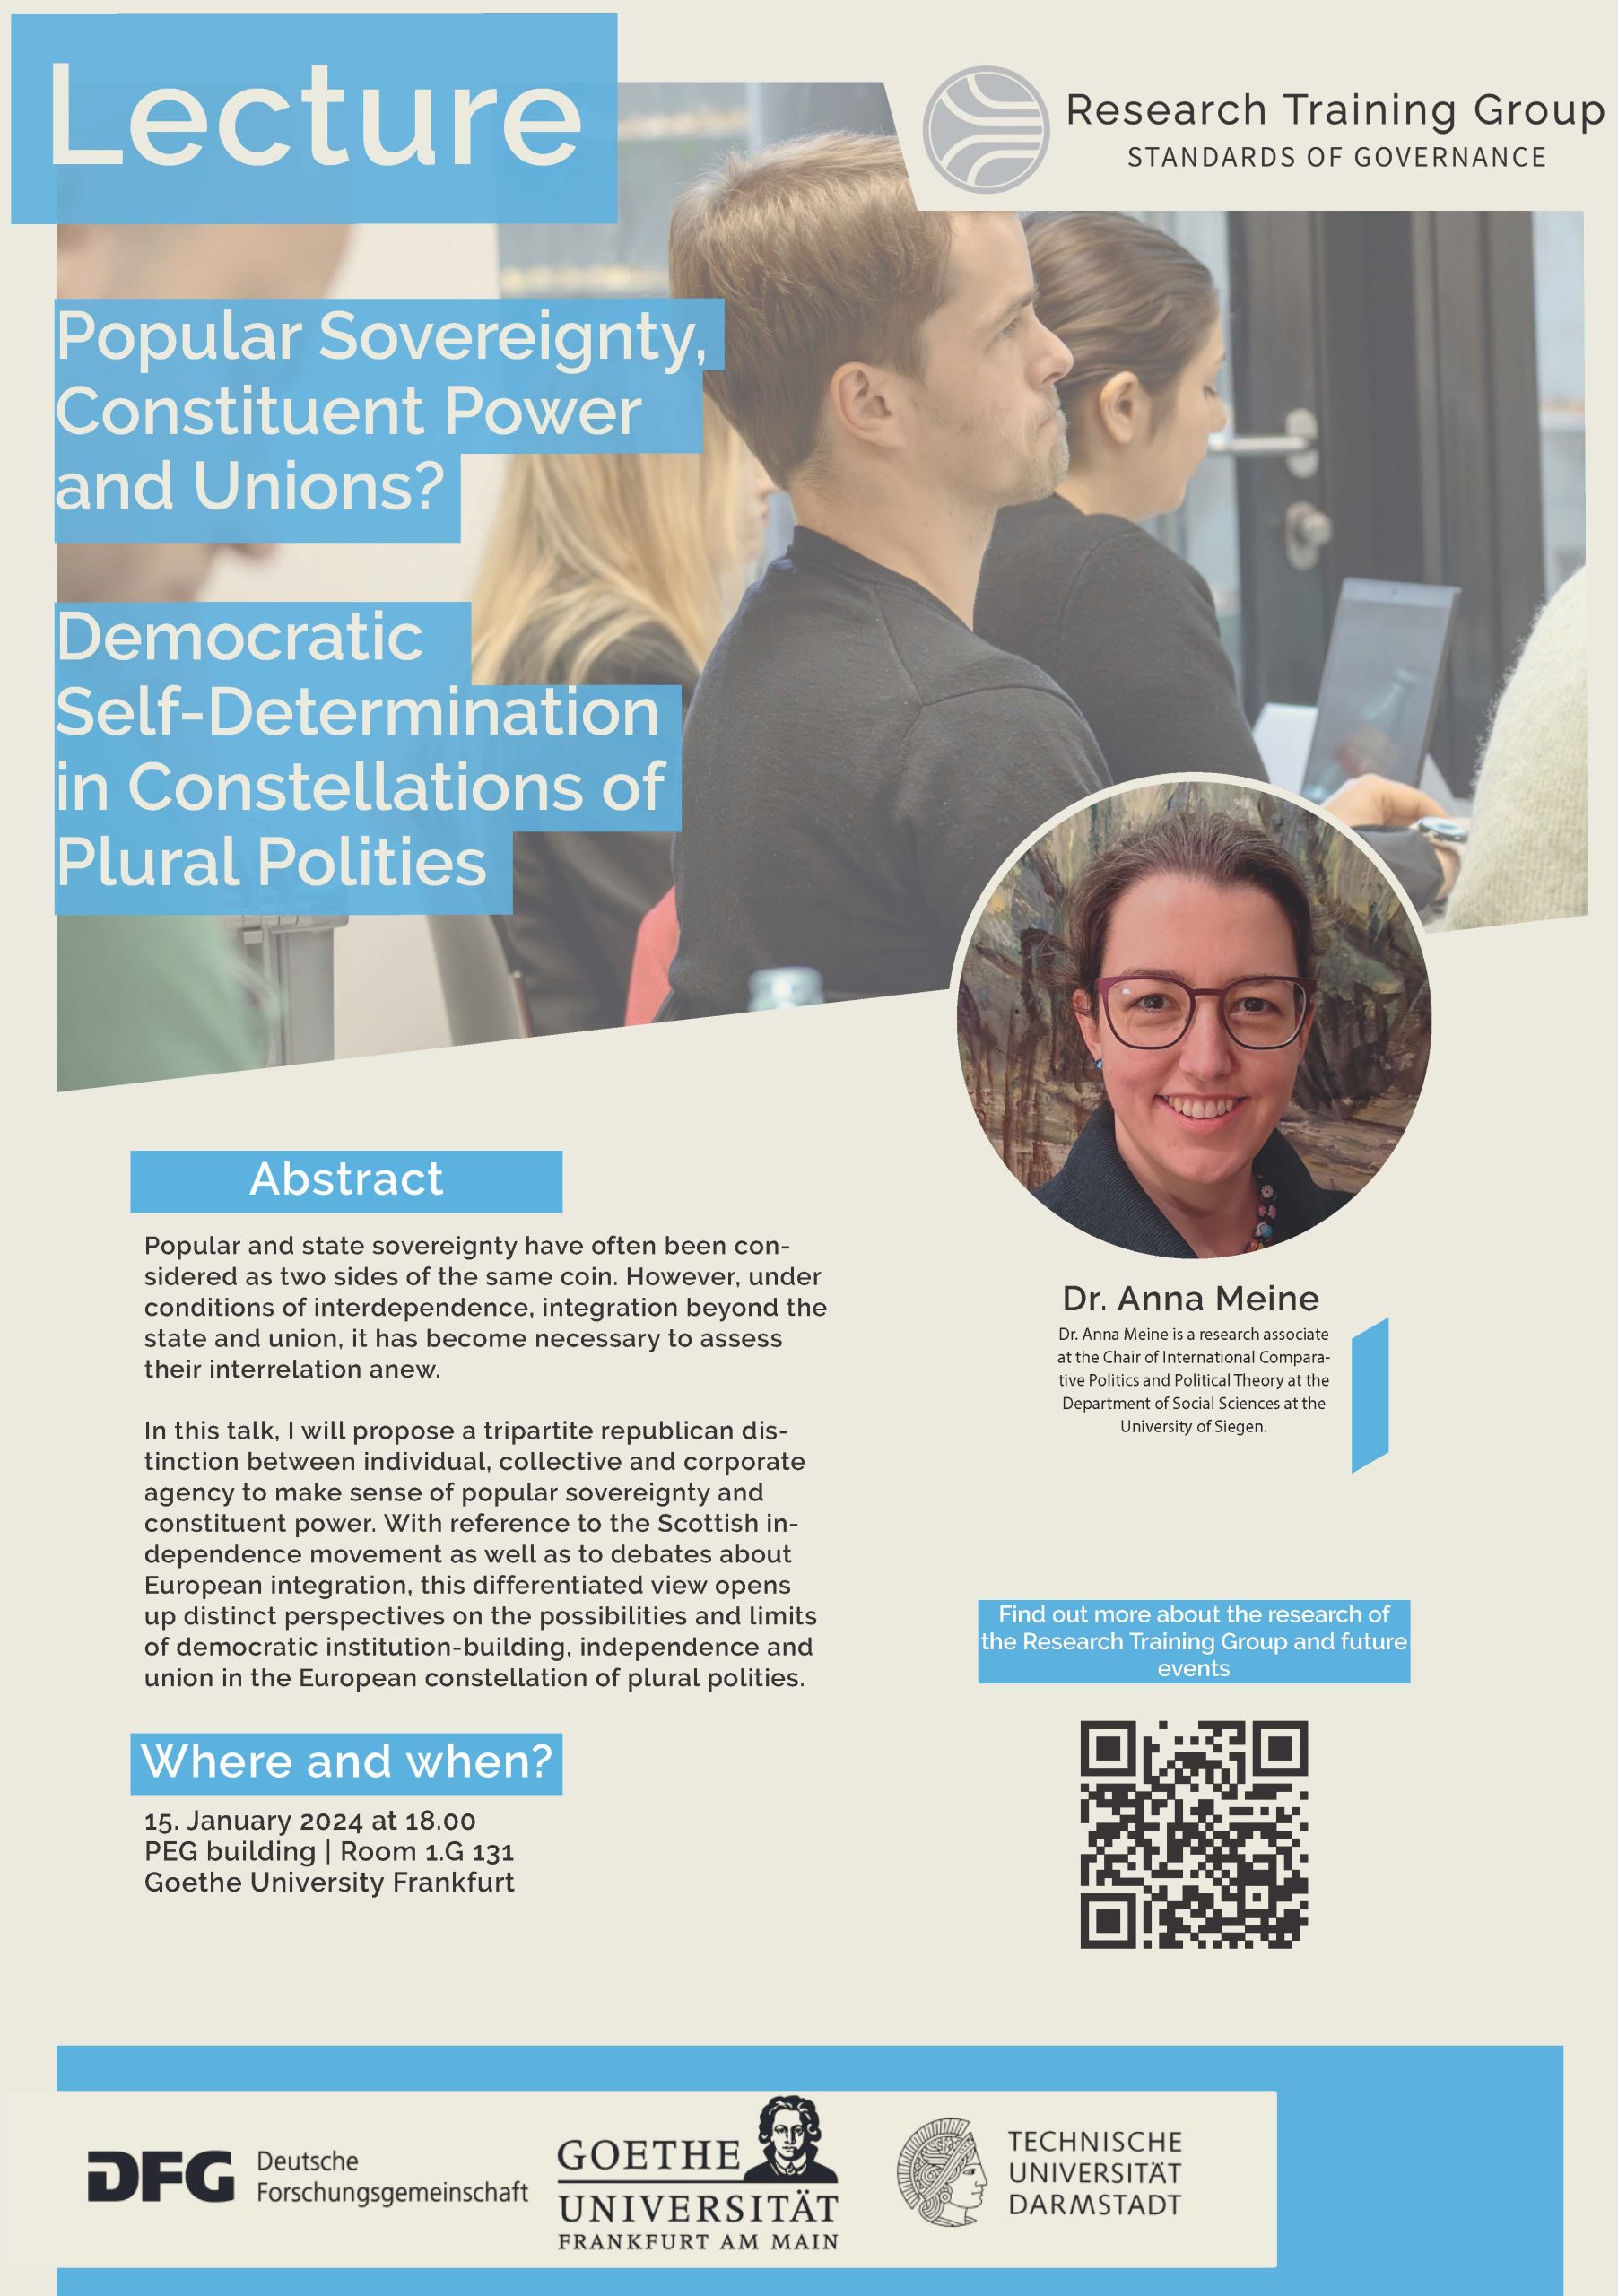 Popular Sovereignty, Constituent Power and Unions? Democratic self-determination in constellations of plural polities